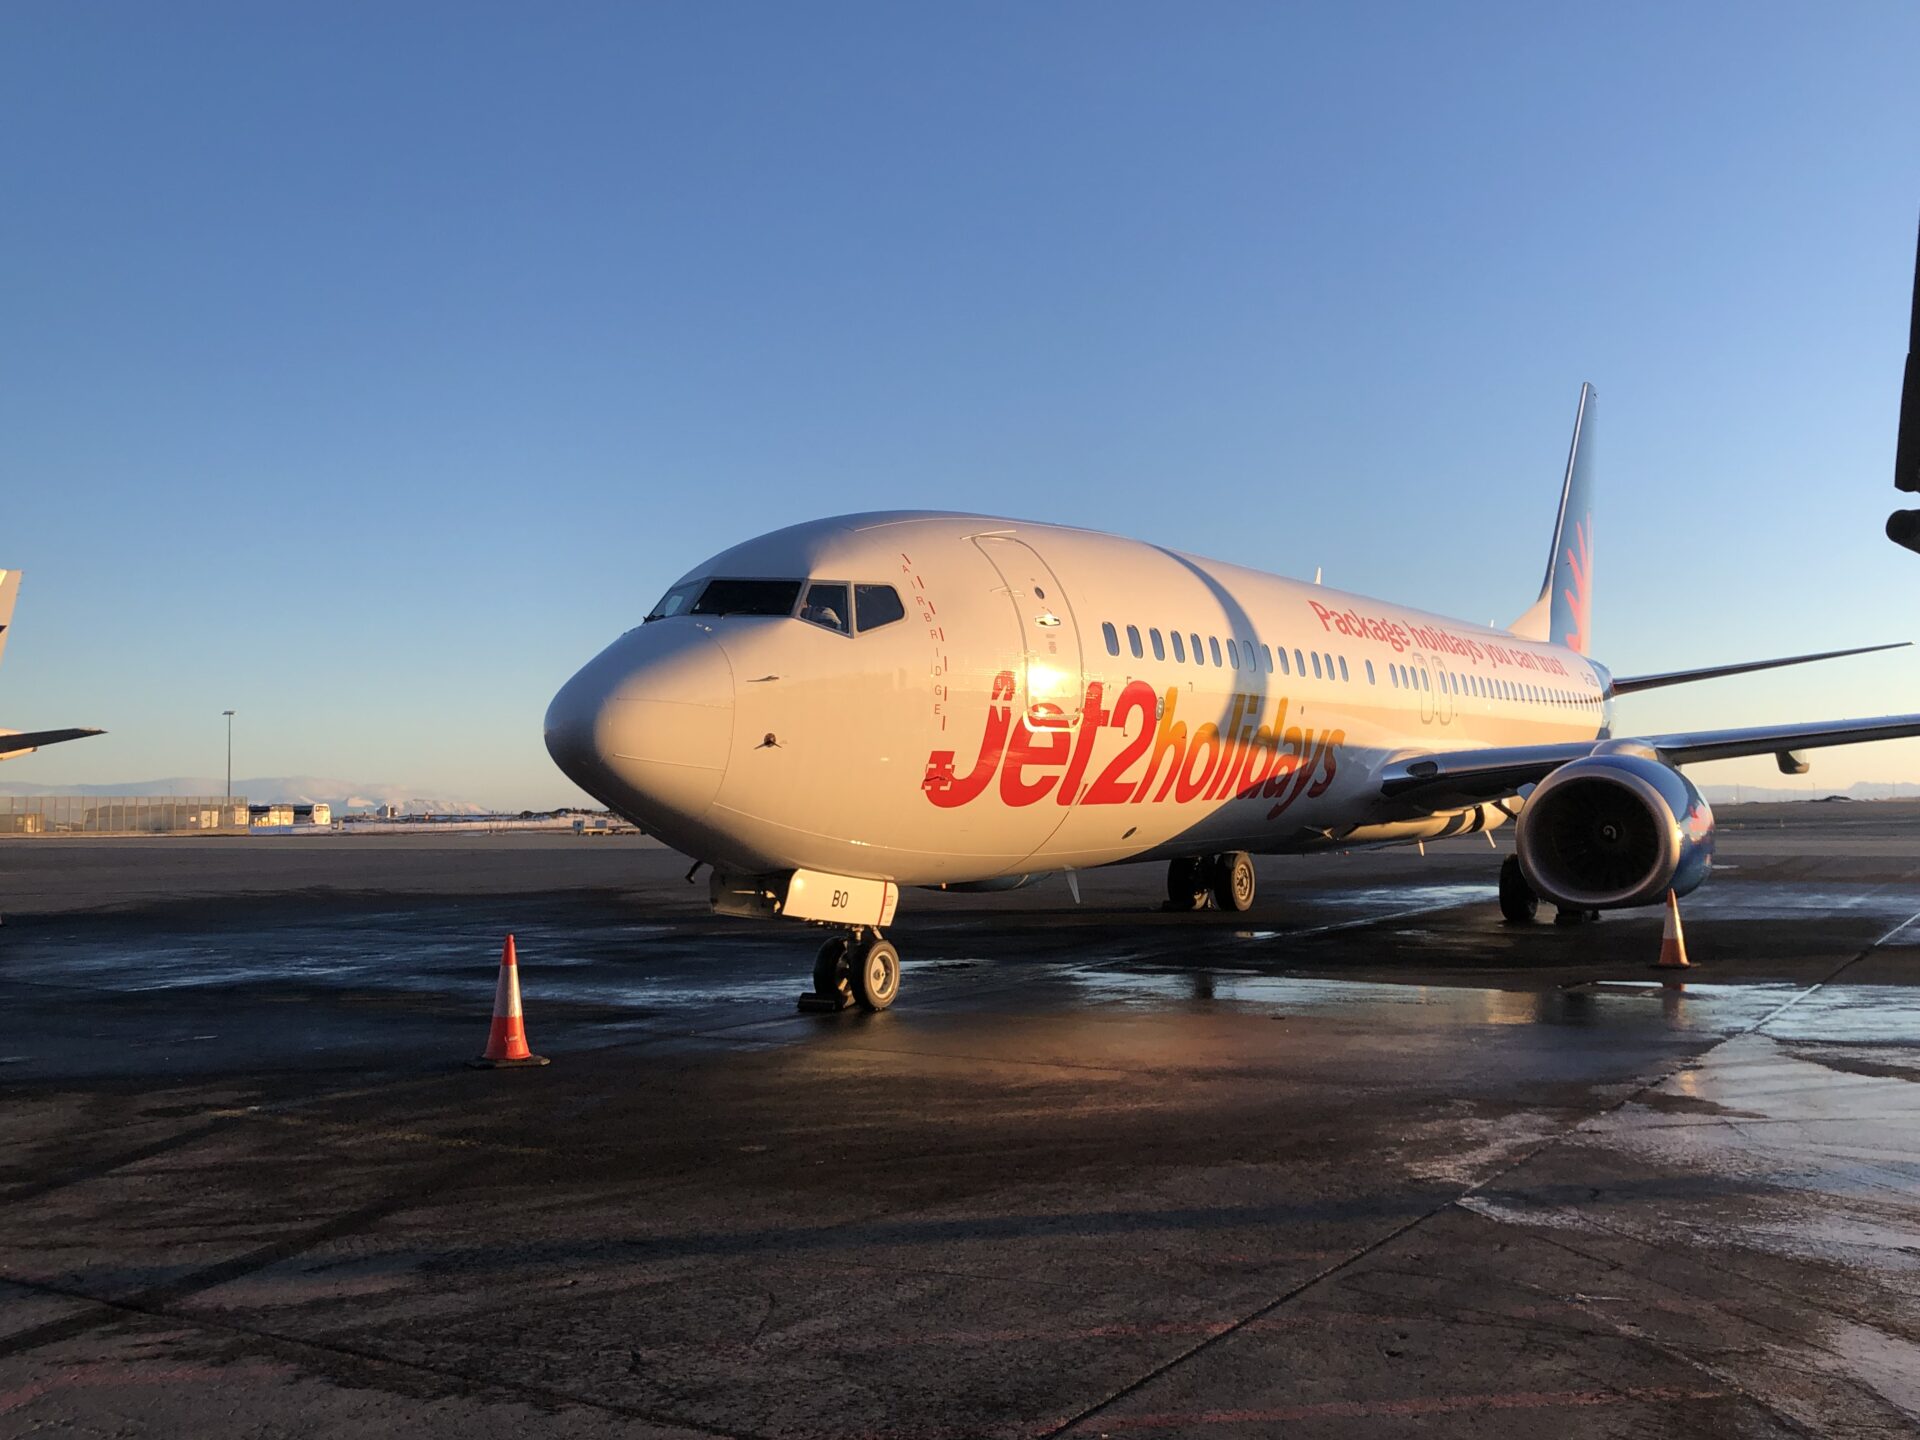 First arrival of Jet2.com in Keflavíkur in February 2019 // Source: Isavia